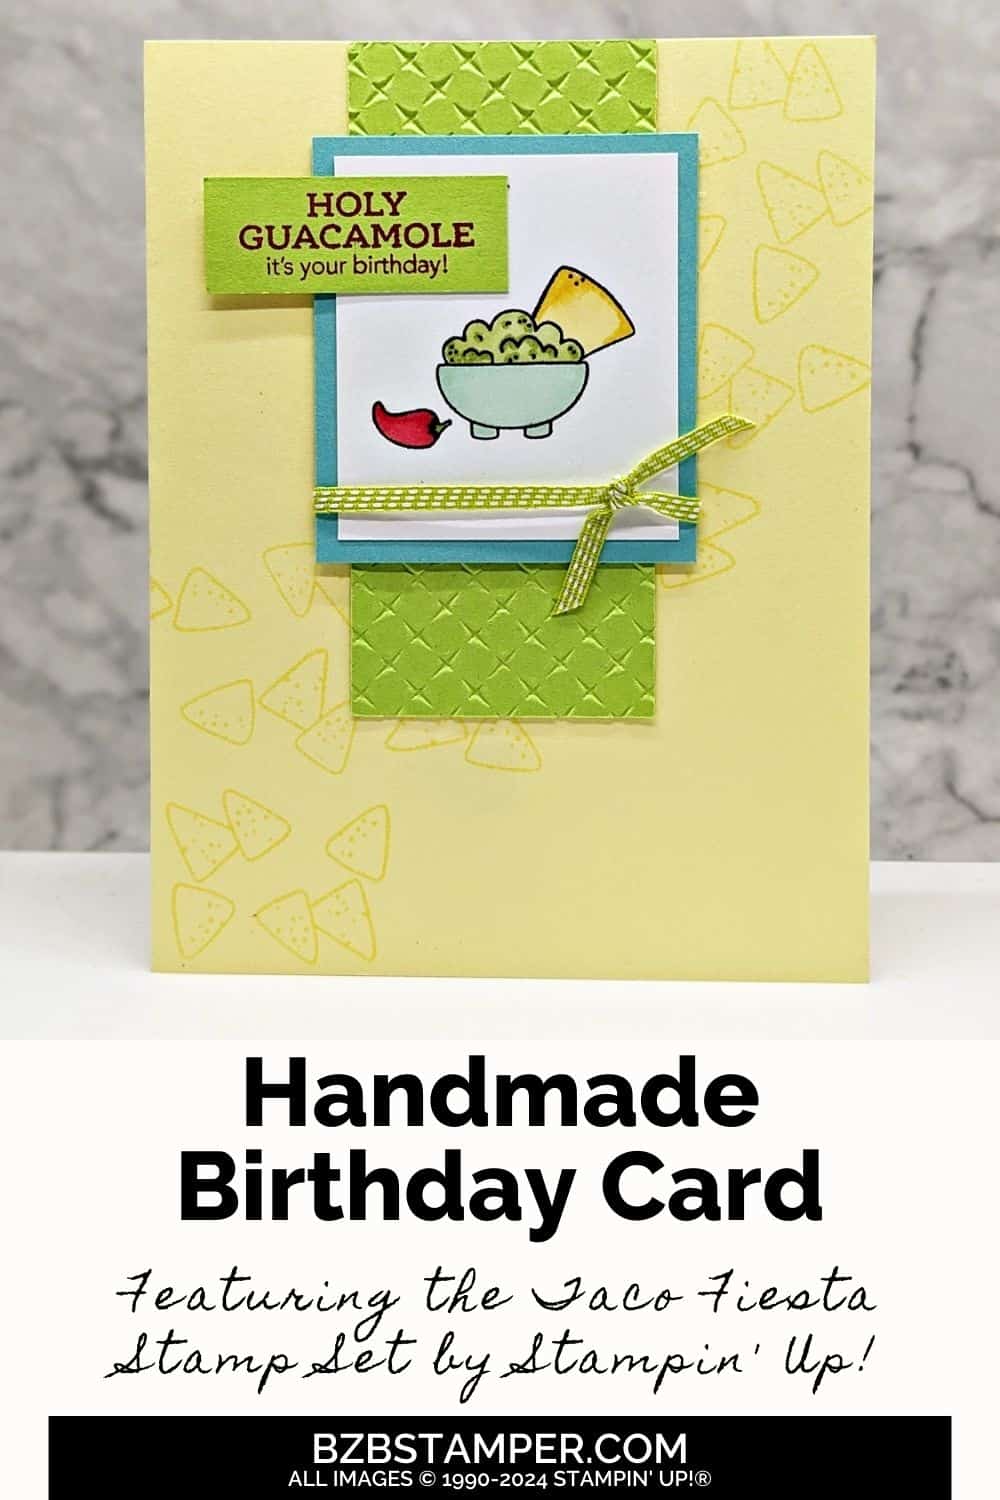 The Taco Fiesta Stamp Set in yellow, green and blue featuring a guacamole bowl with chips and a Birthday Sentiment.